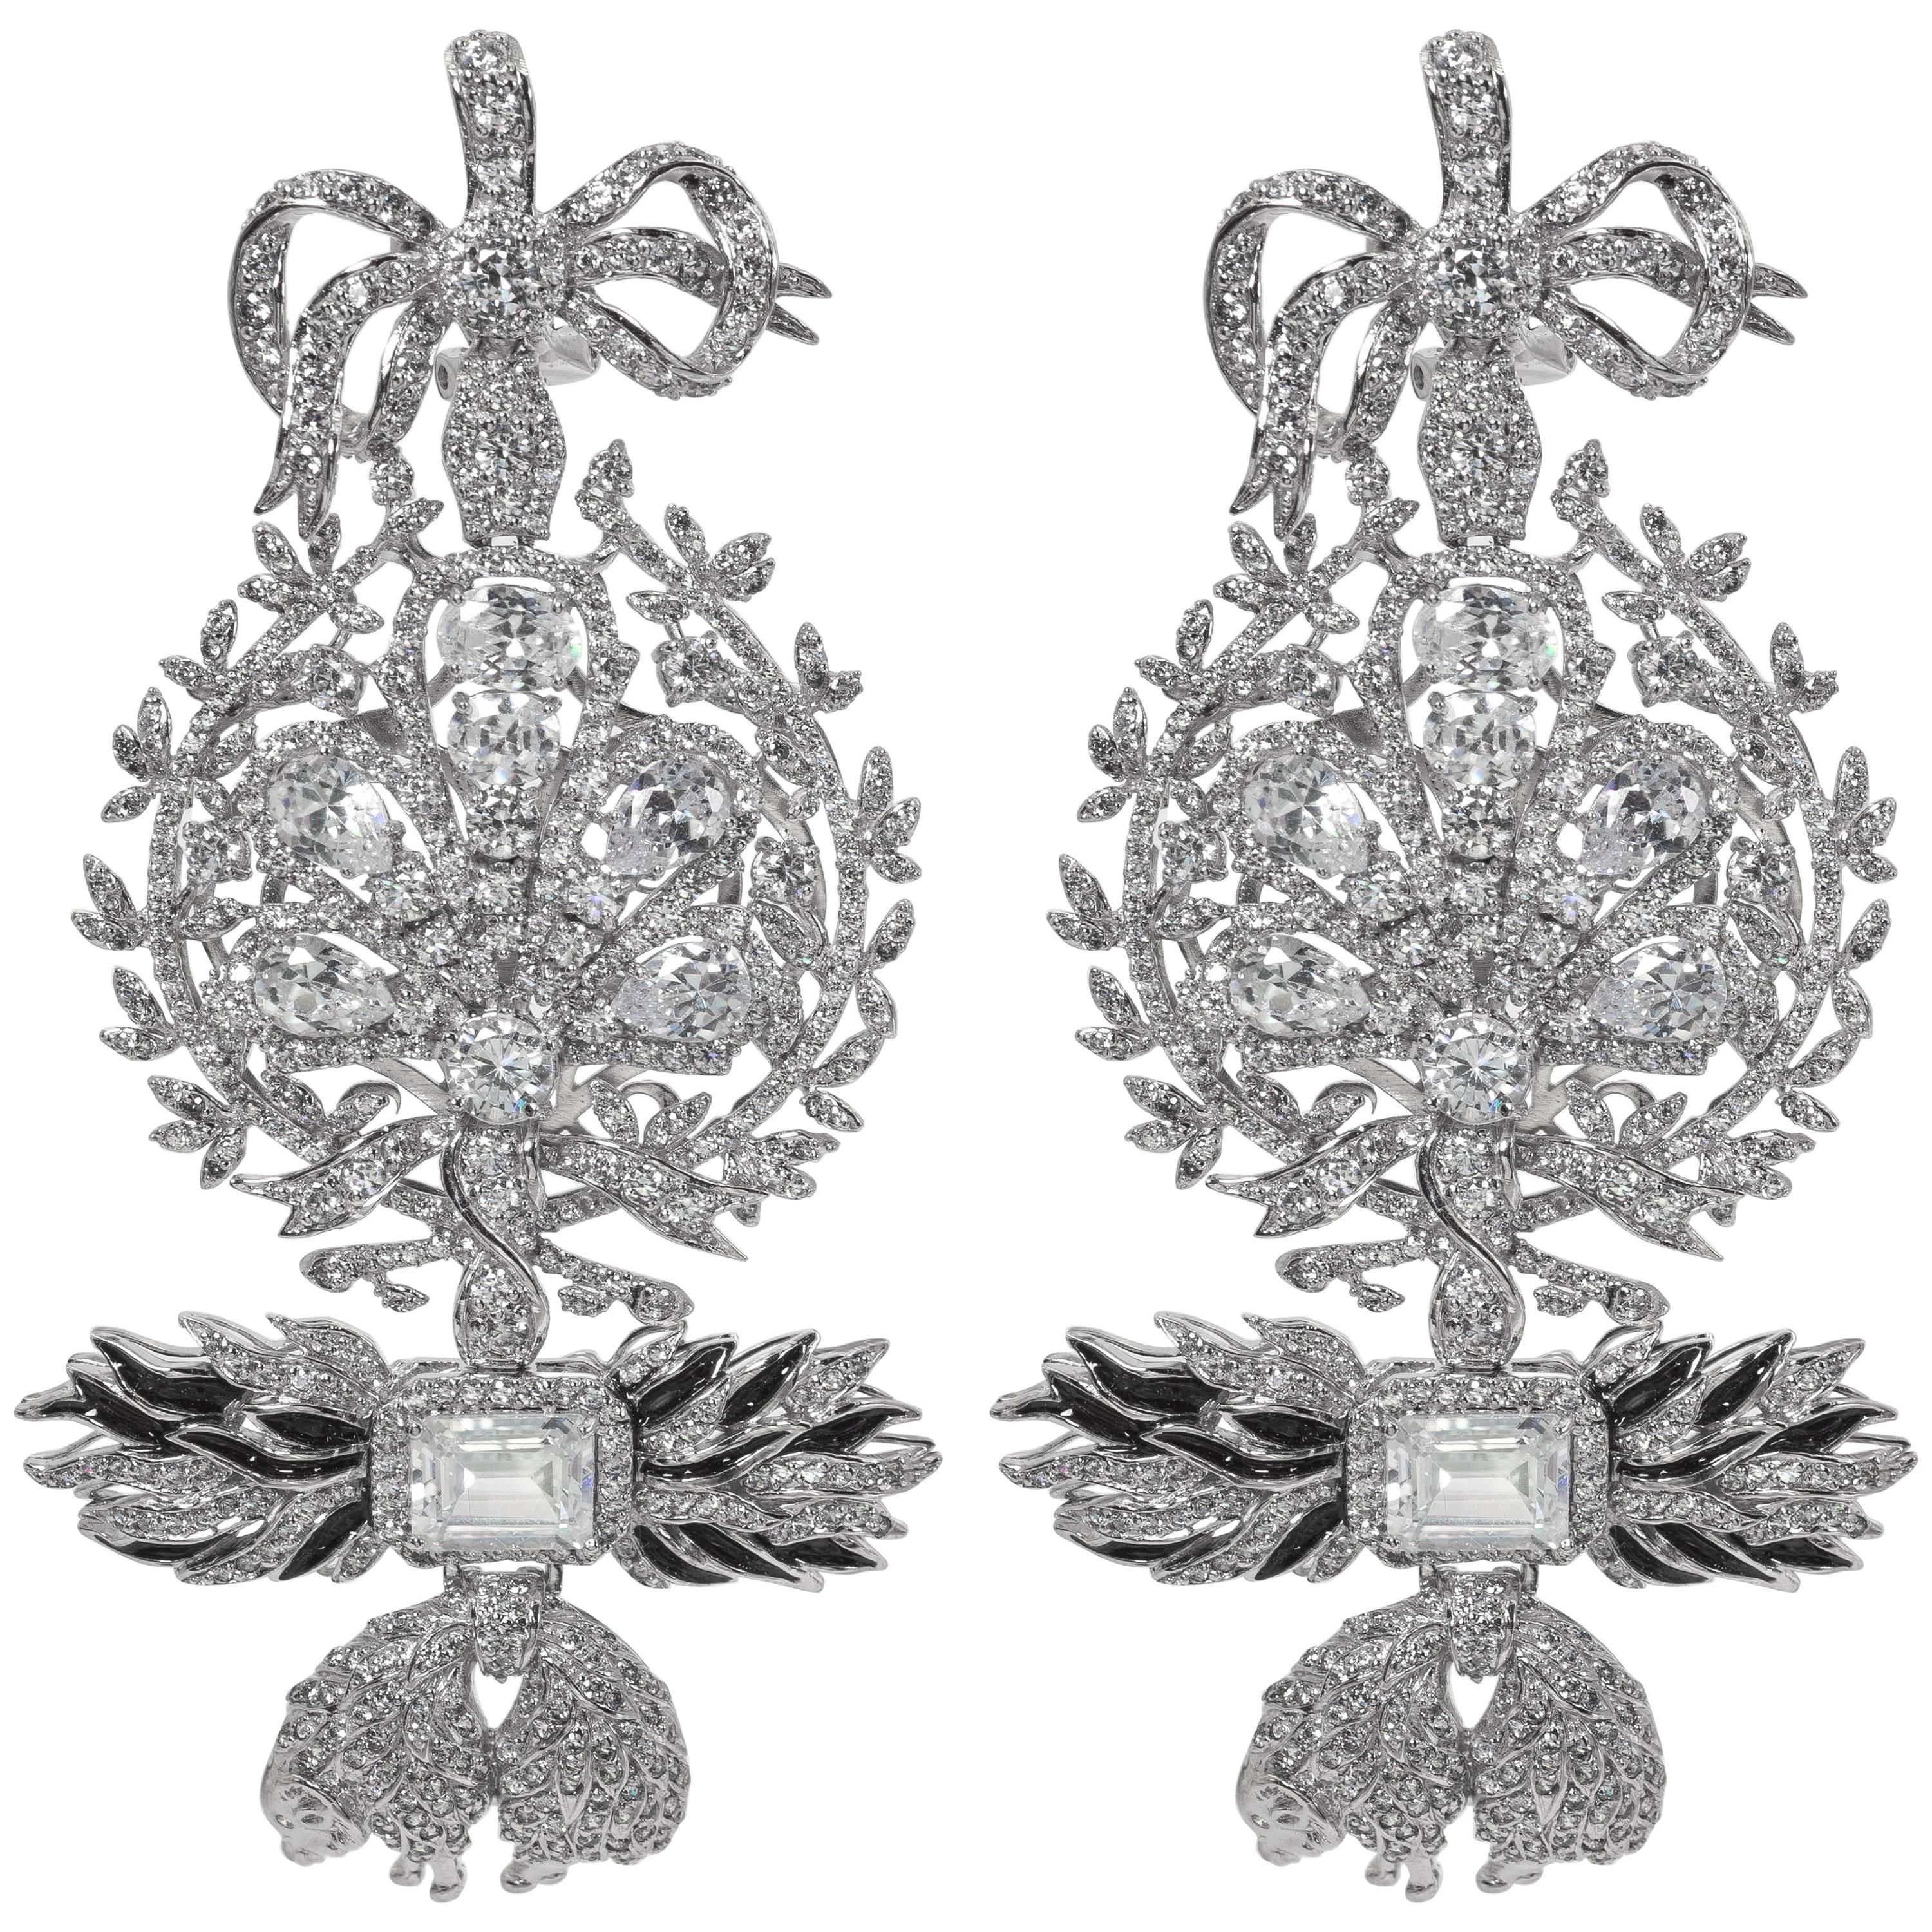 Magnificent Costume Jewelry Large  Diamond Order of the Golden Fleece earrings